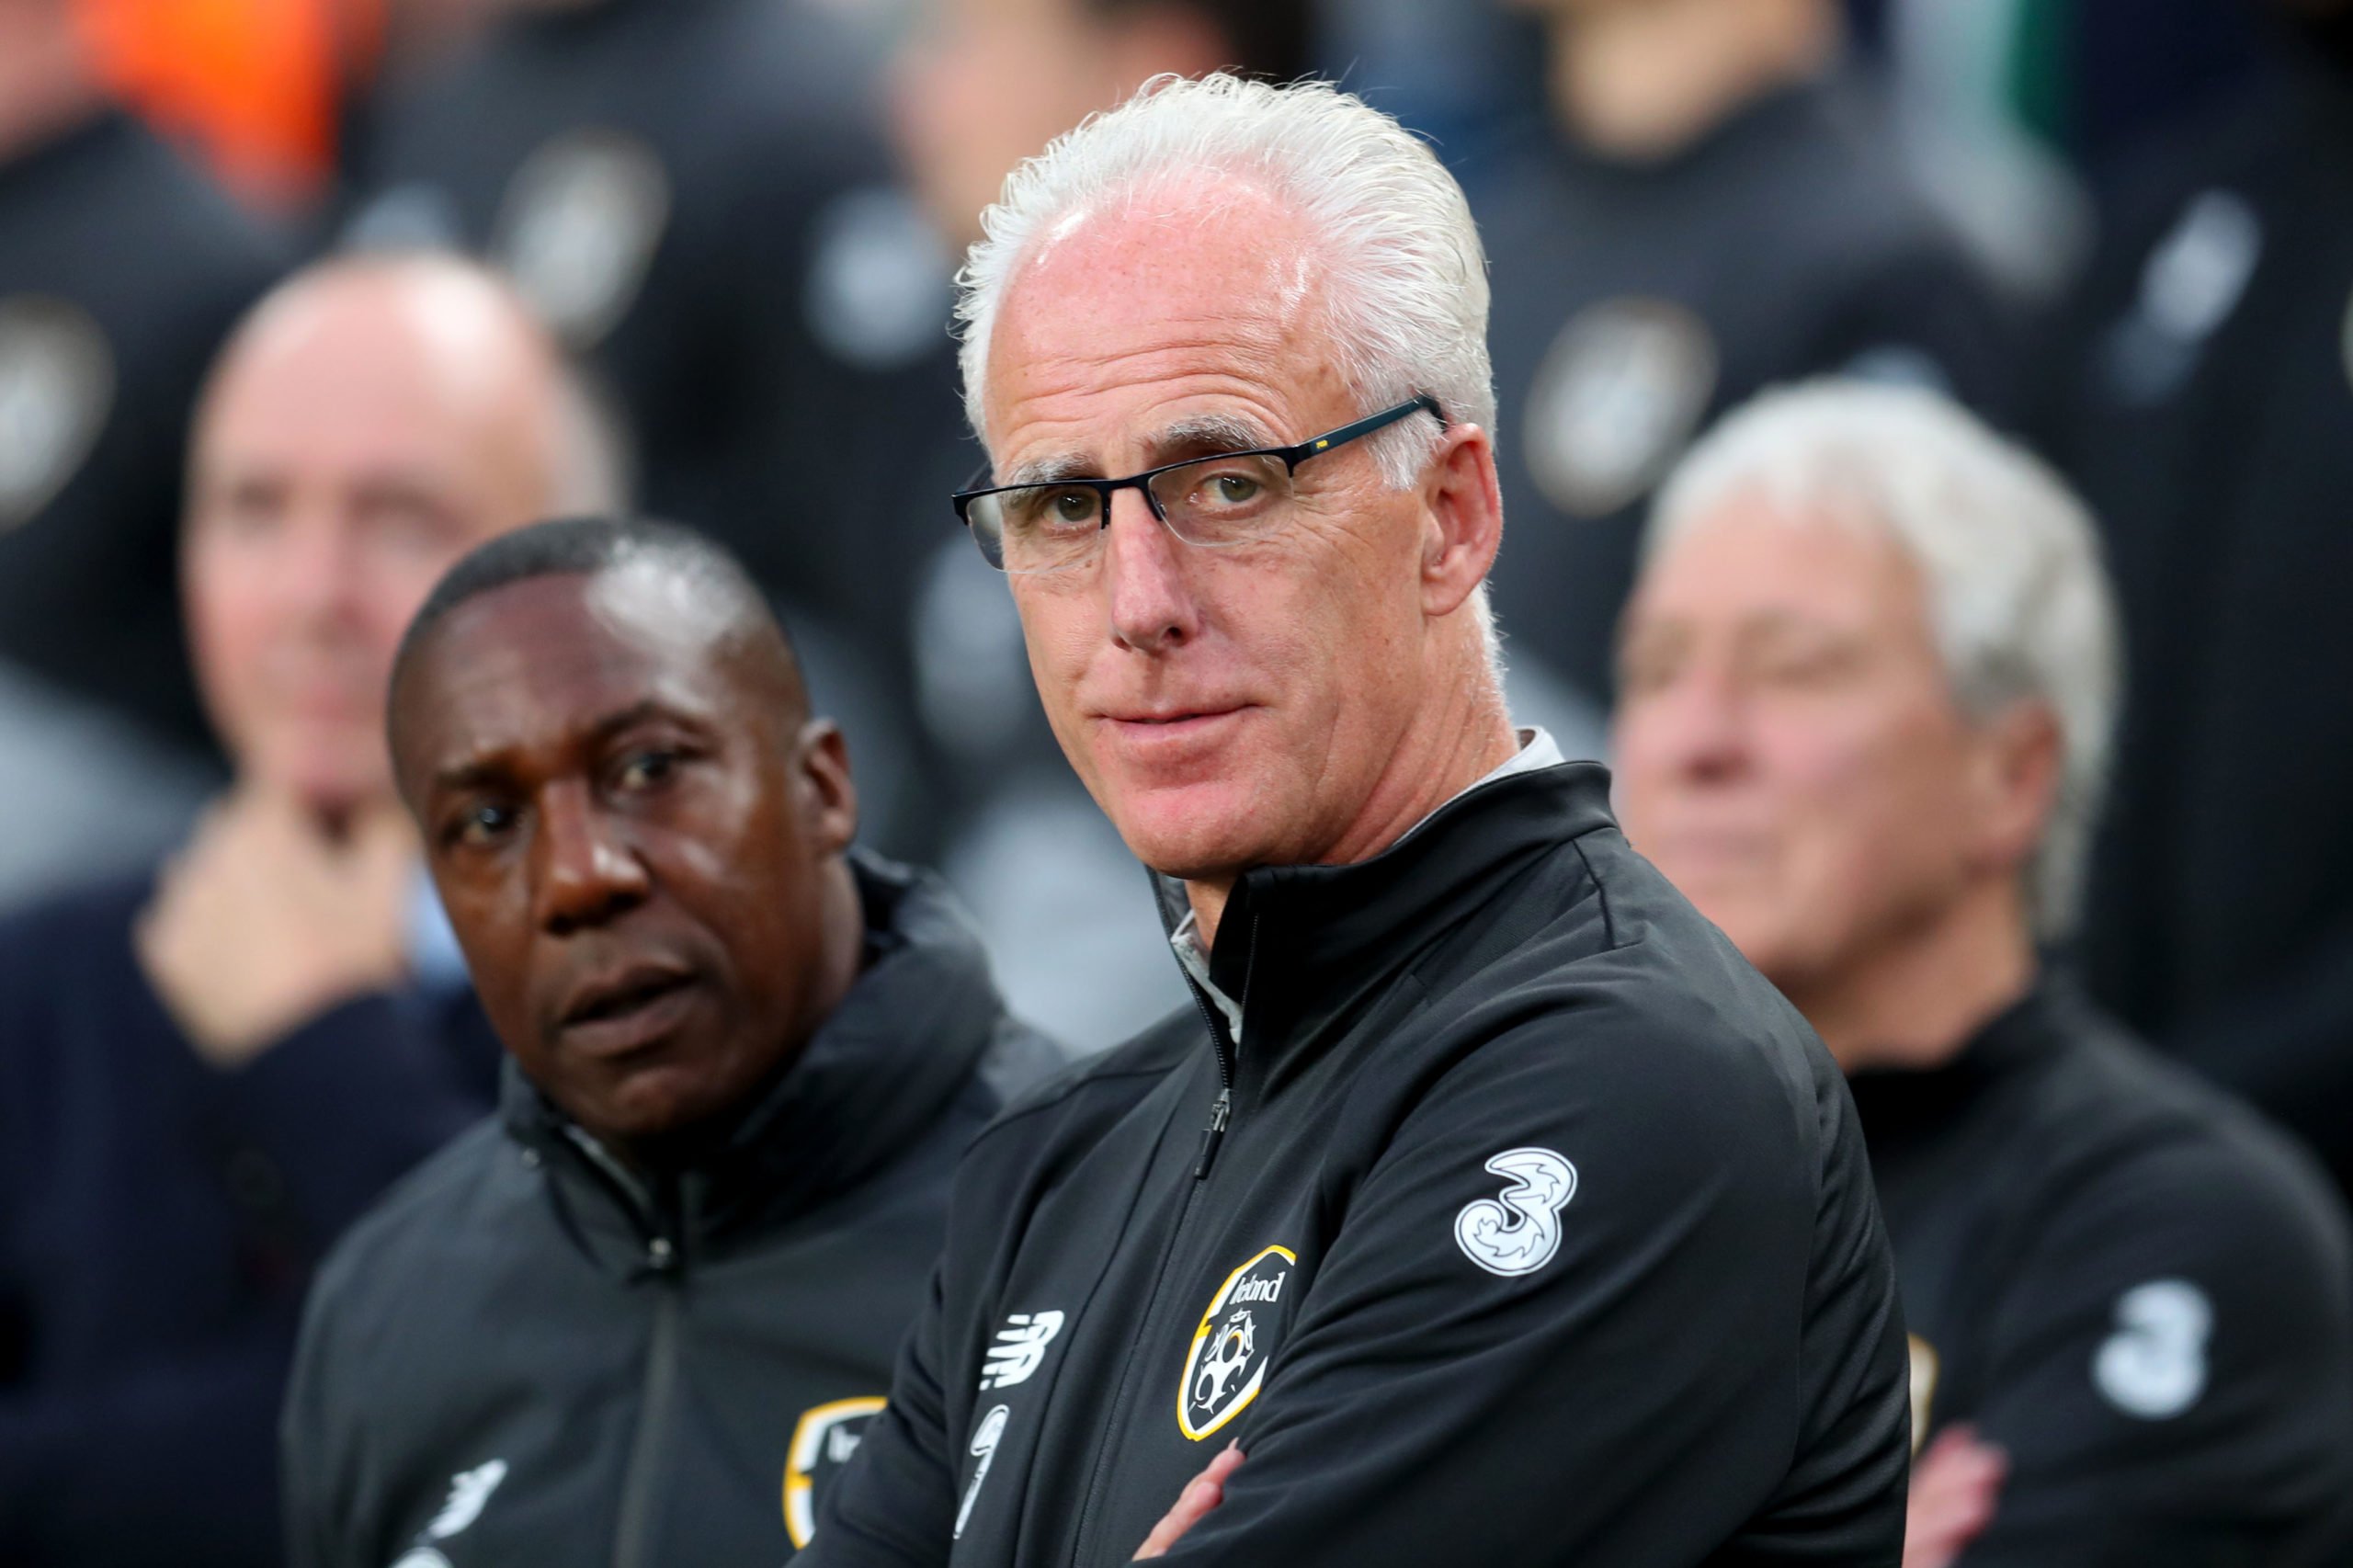 Cardiff City chairman admits approaches were made for Celtic 'target' Mick McCarthy